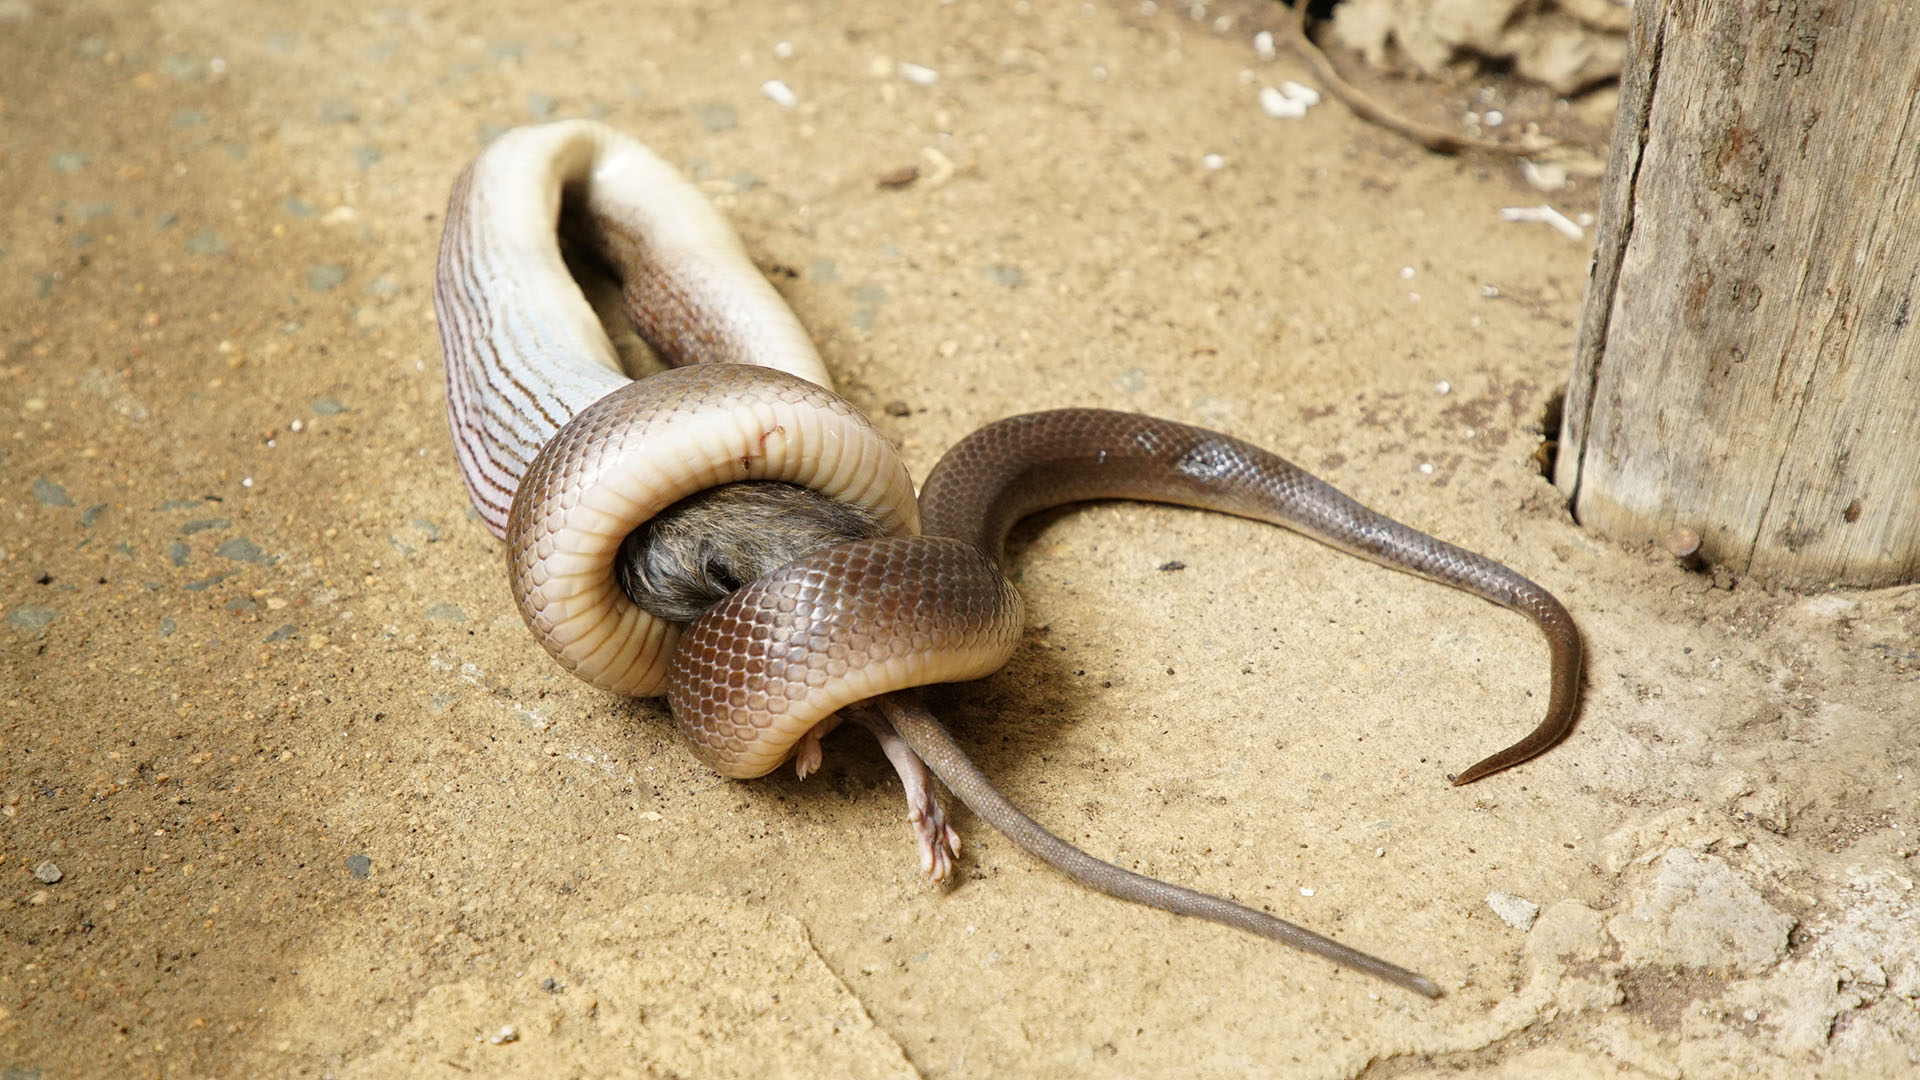 A brown house snake (Boaedon capensis) in the process of constricting and ingesting a rat.  This... [Photo of the day - September 2023]